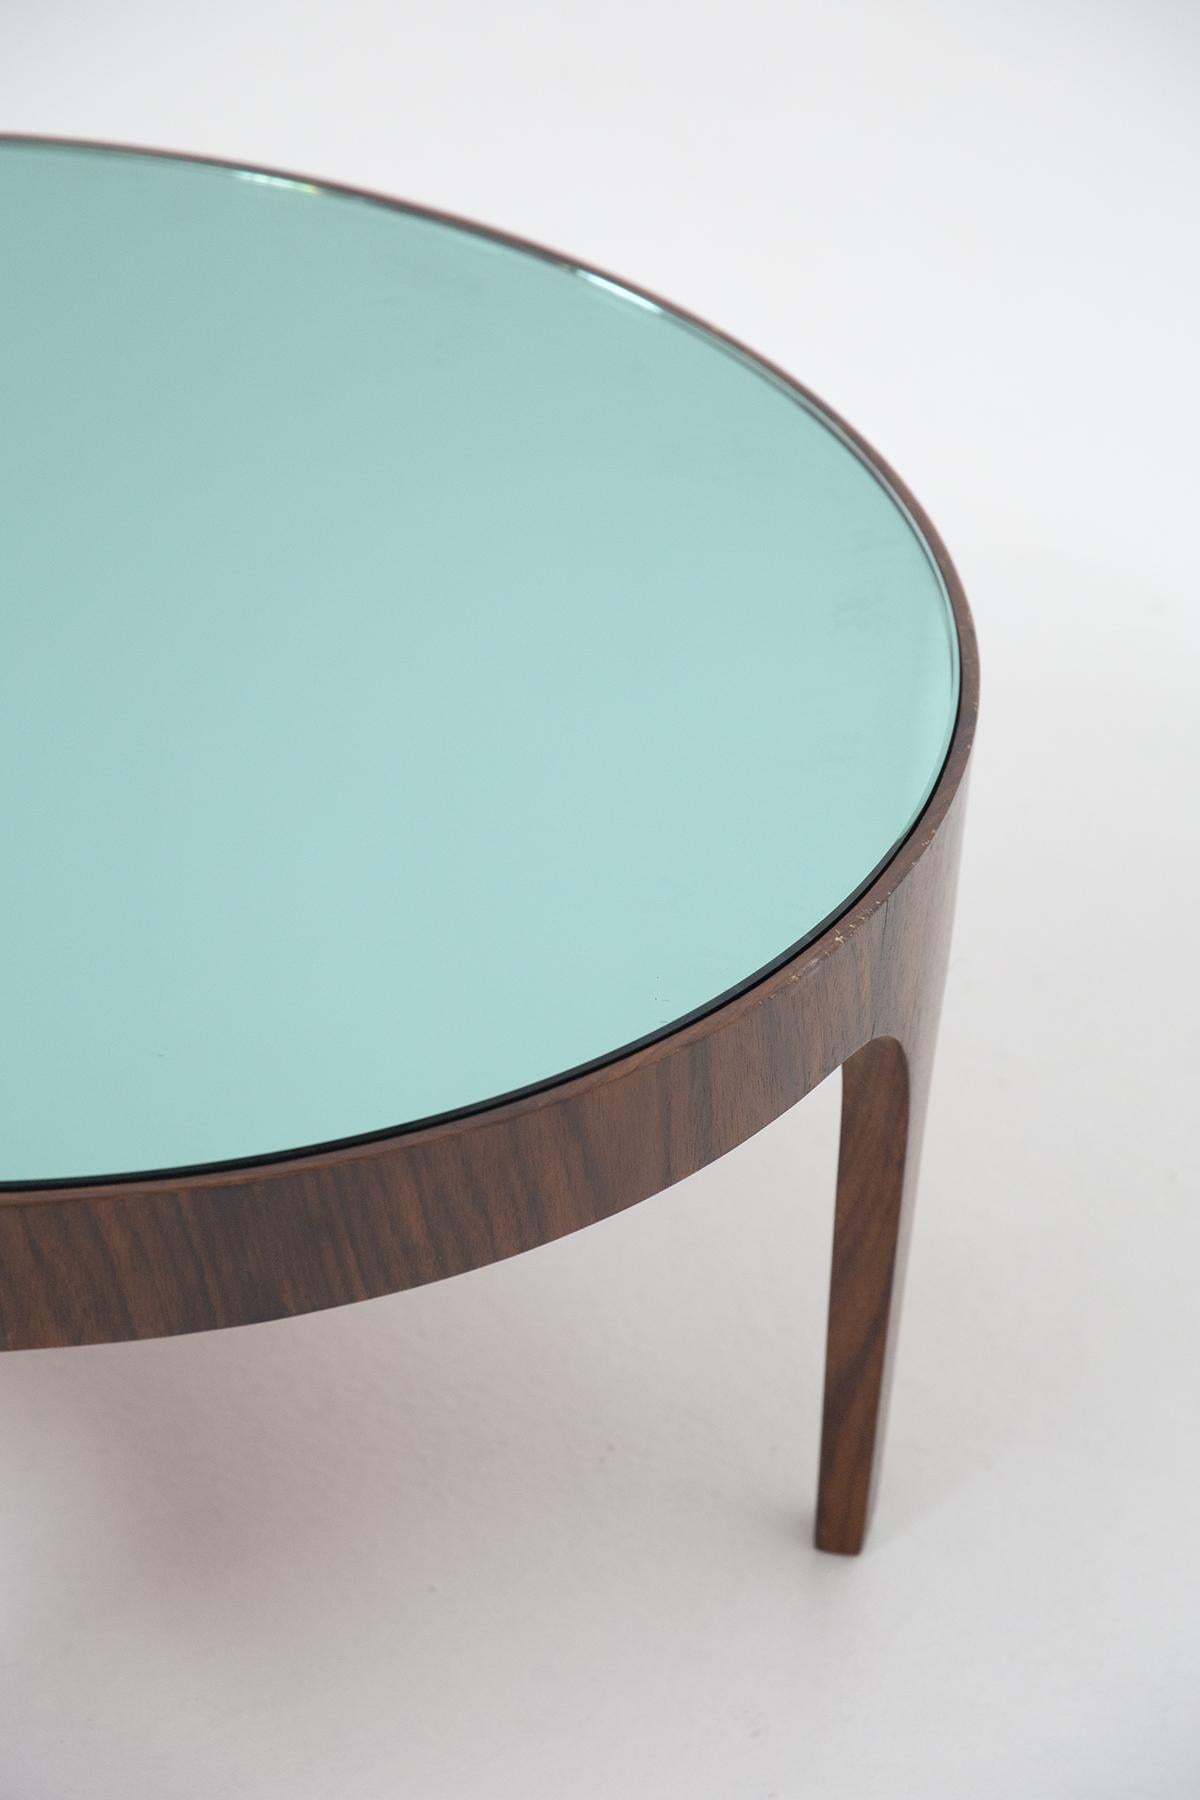 Mid-Century Modern Coffe Table with Light Blue Glass by Fontana Arte, Manufacturer's Label